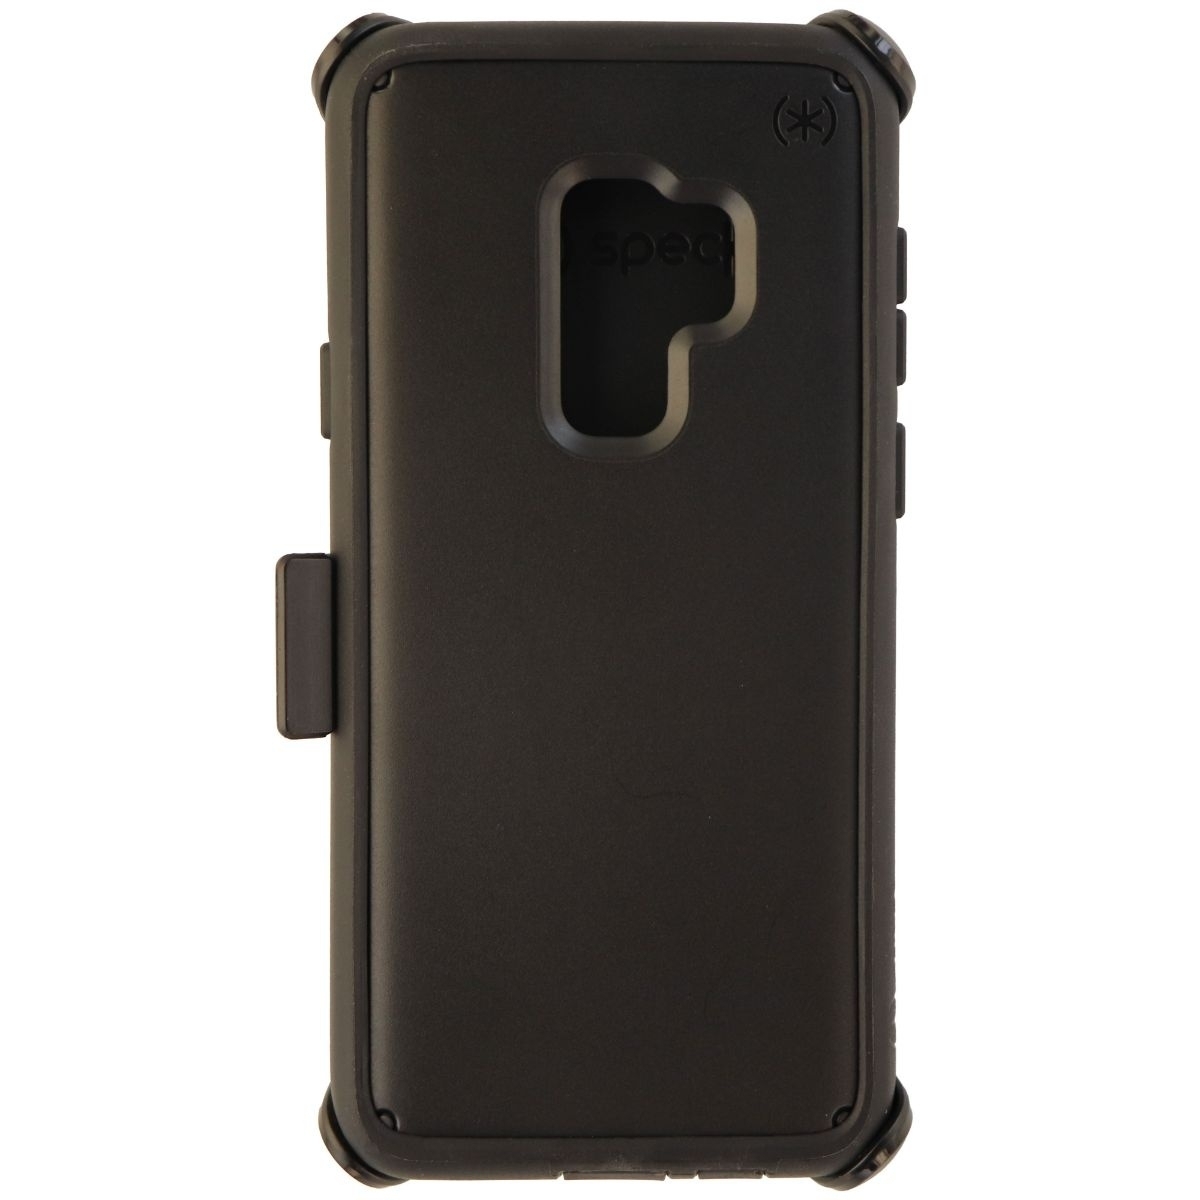 Speck Presidio Ultra Series Hard Case And Holster For Galaxy S9+ (Plus) - Black